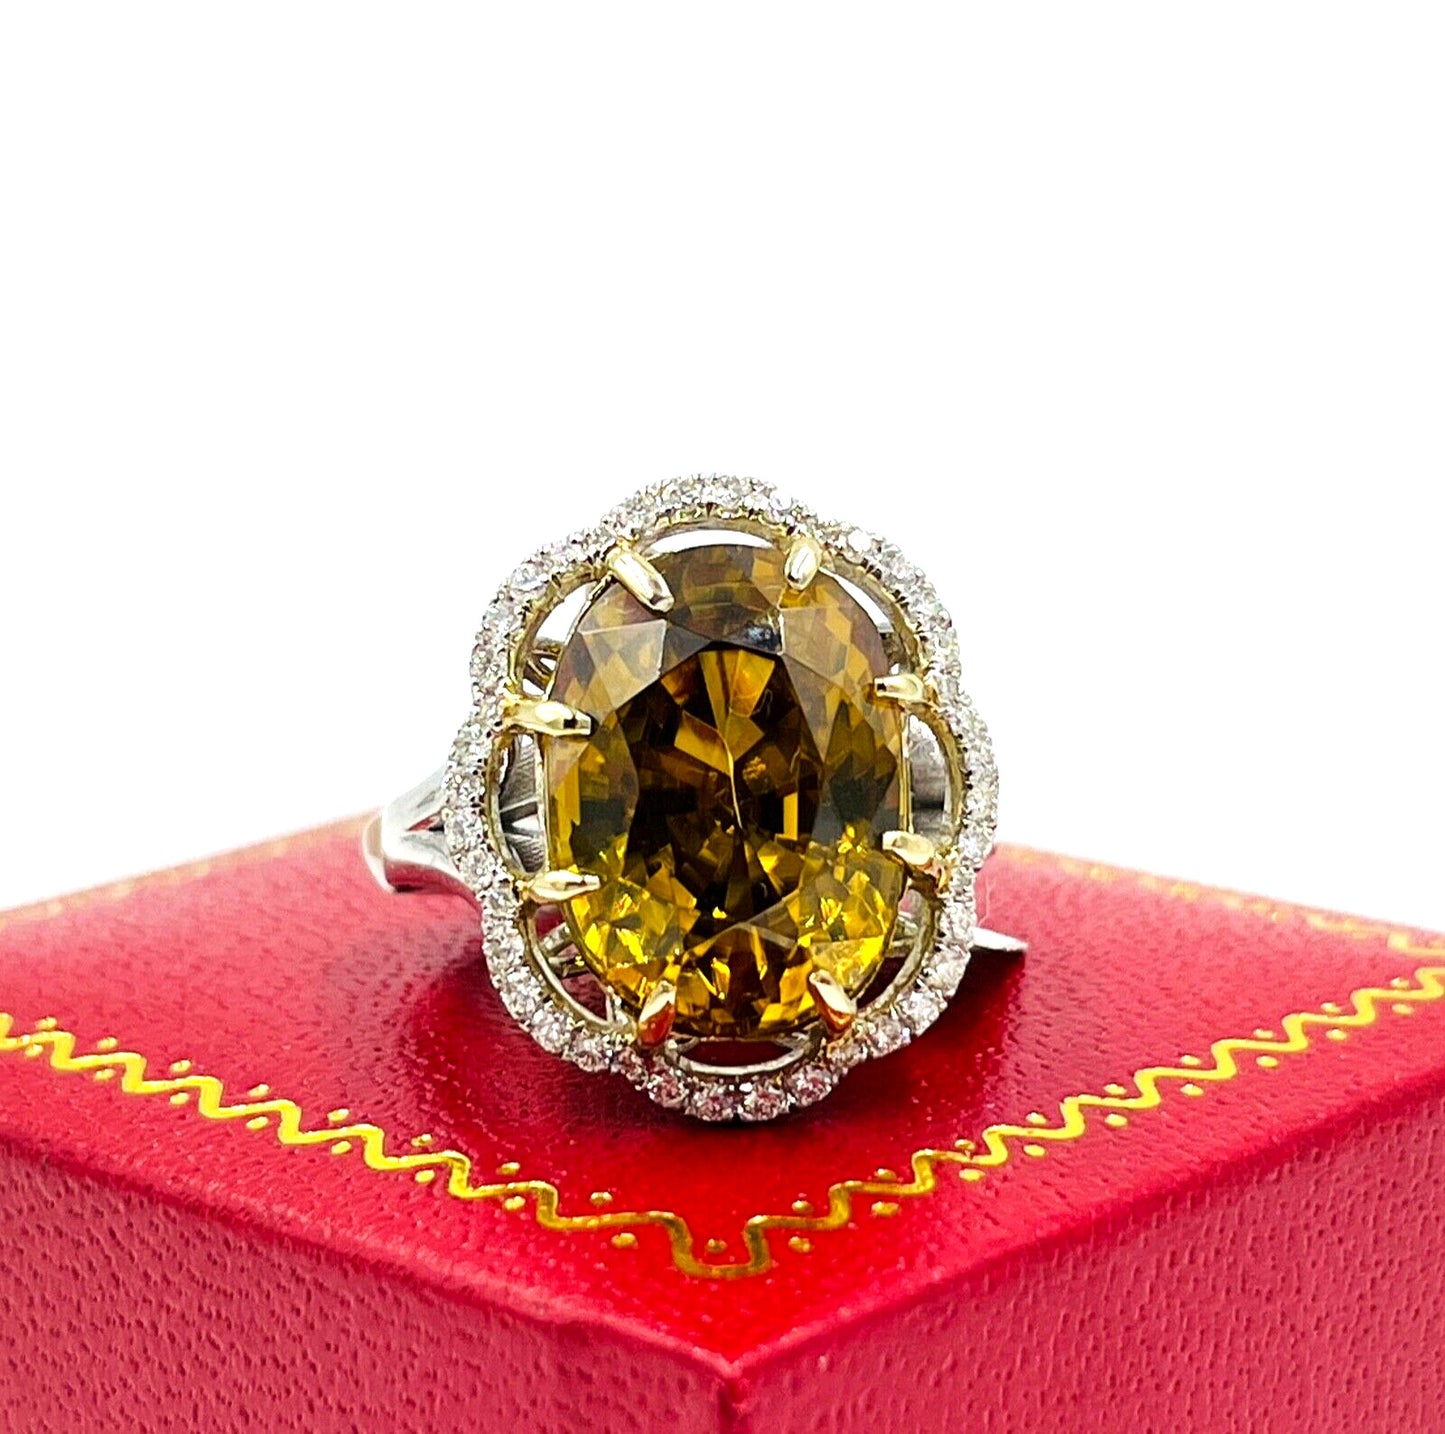 Stunning 12.4cts Natural Yellow Zircon diamond halo Cocktail ring White Gold